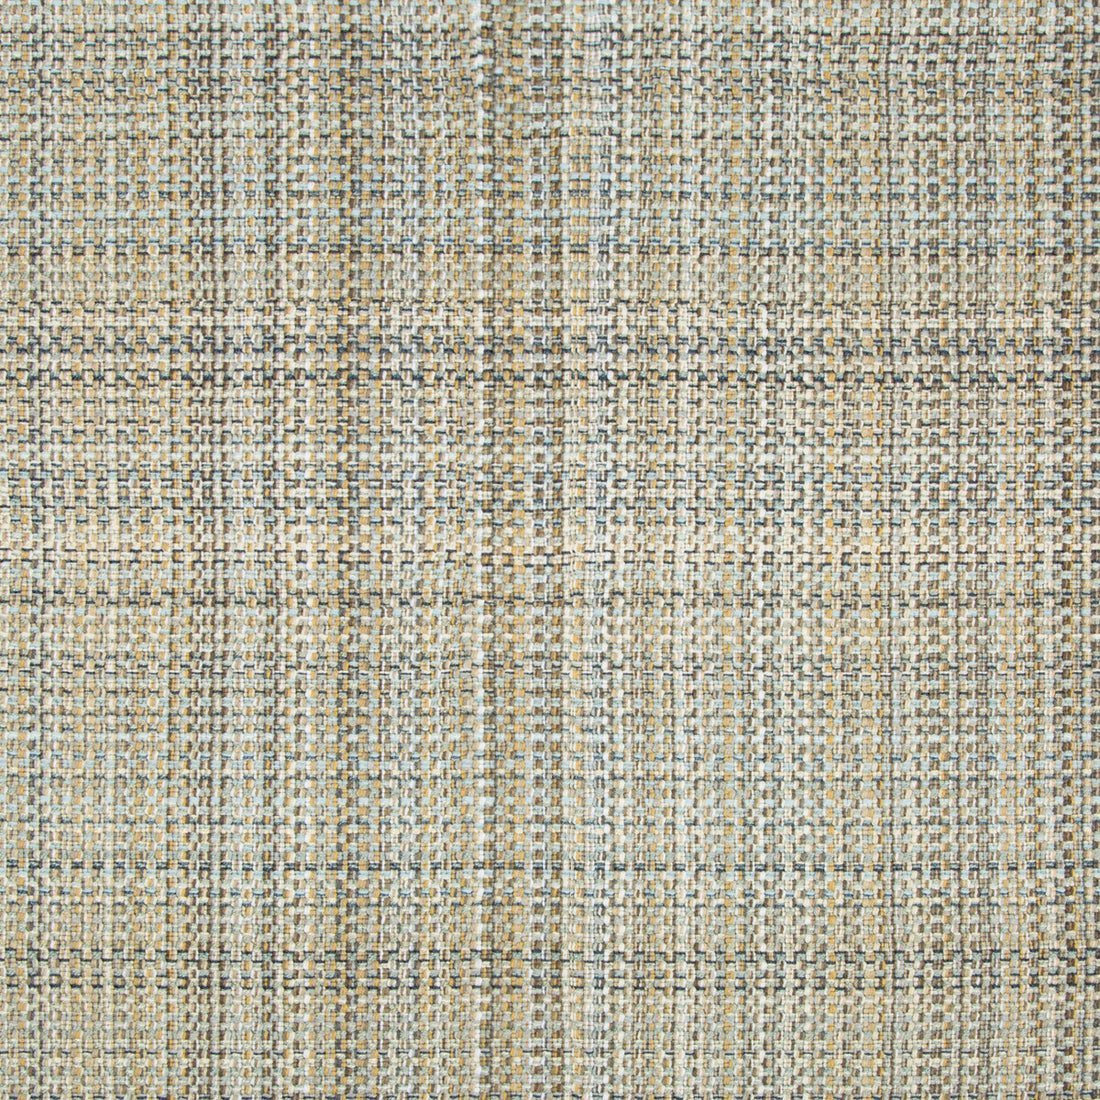 Tailor Made fabric in birch color - pattern 34932.1416.0 - by Kravet Couture in the Modern Tailor collection